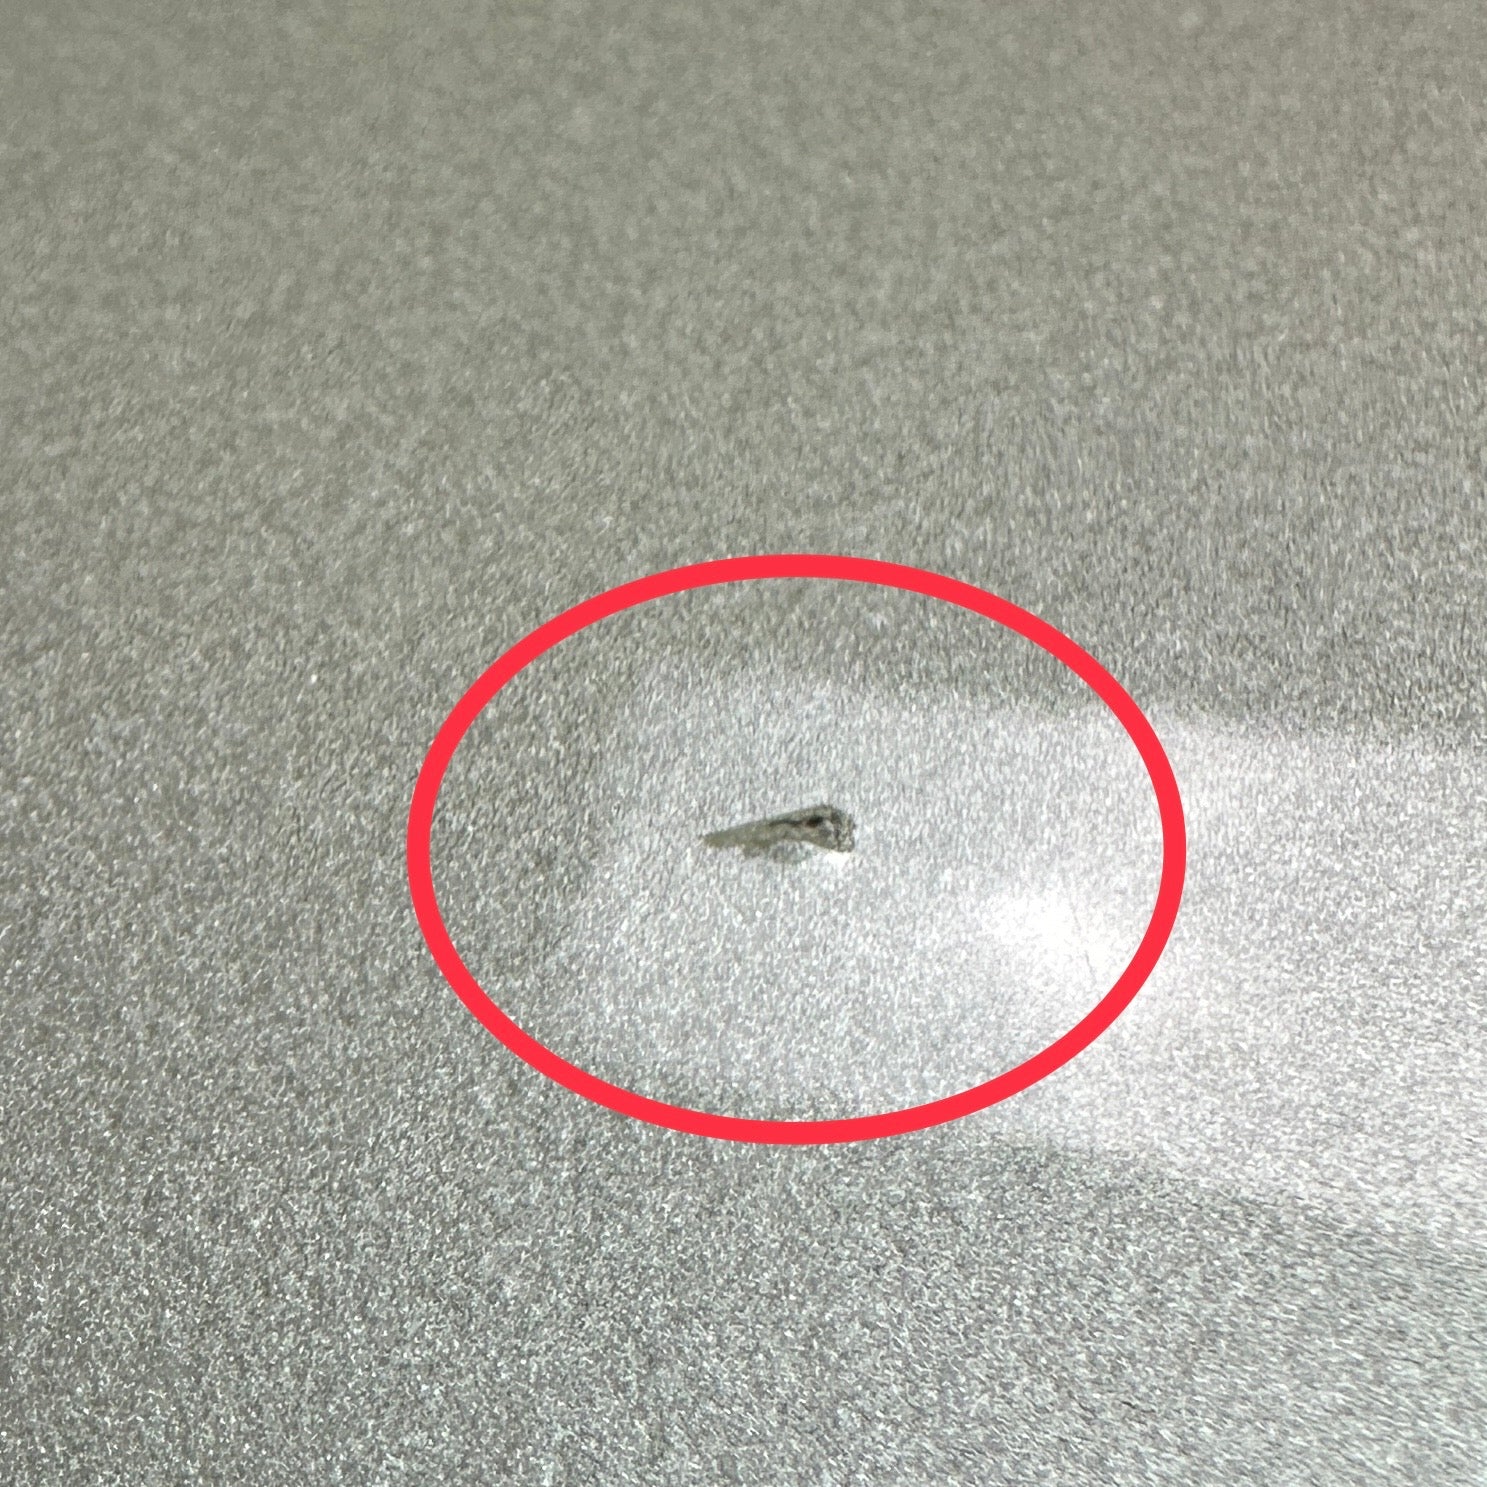 Small chip on front of body.